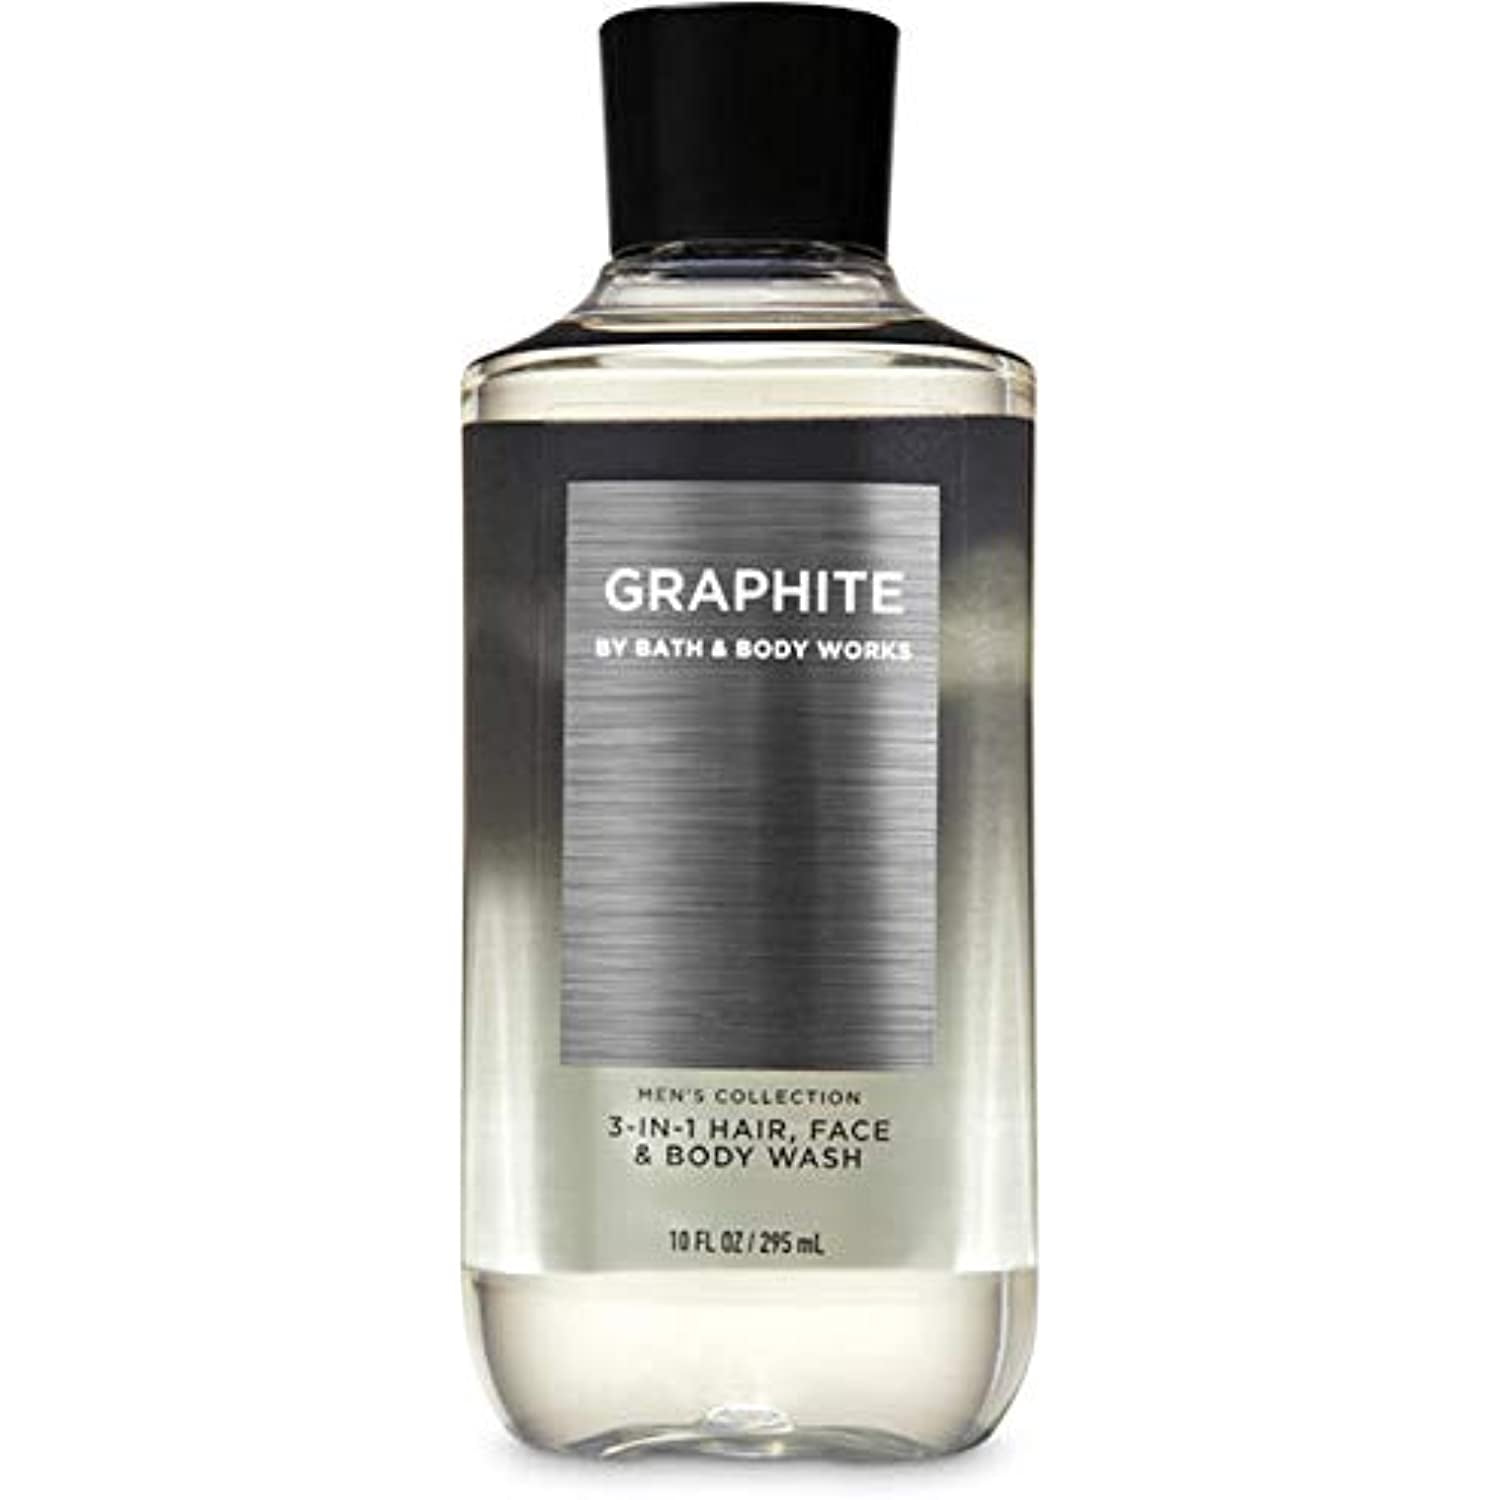 Bath and Body Works Men's Collection Graphite 3-in-1 Hair Face and